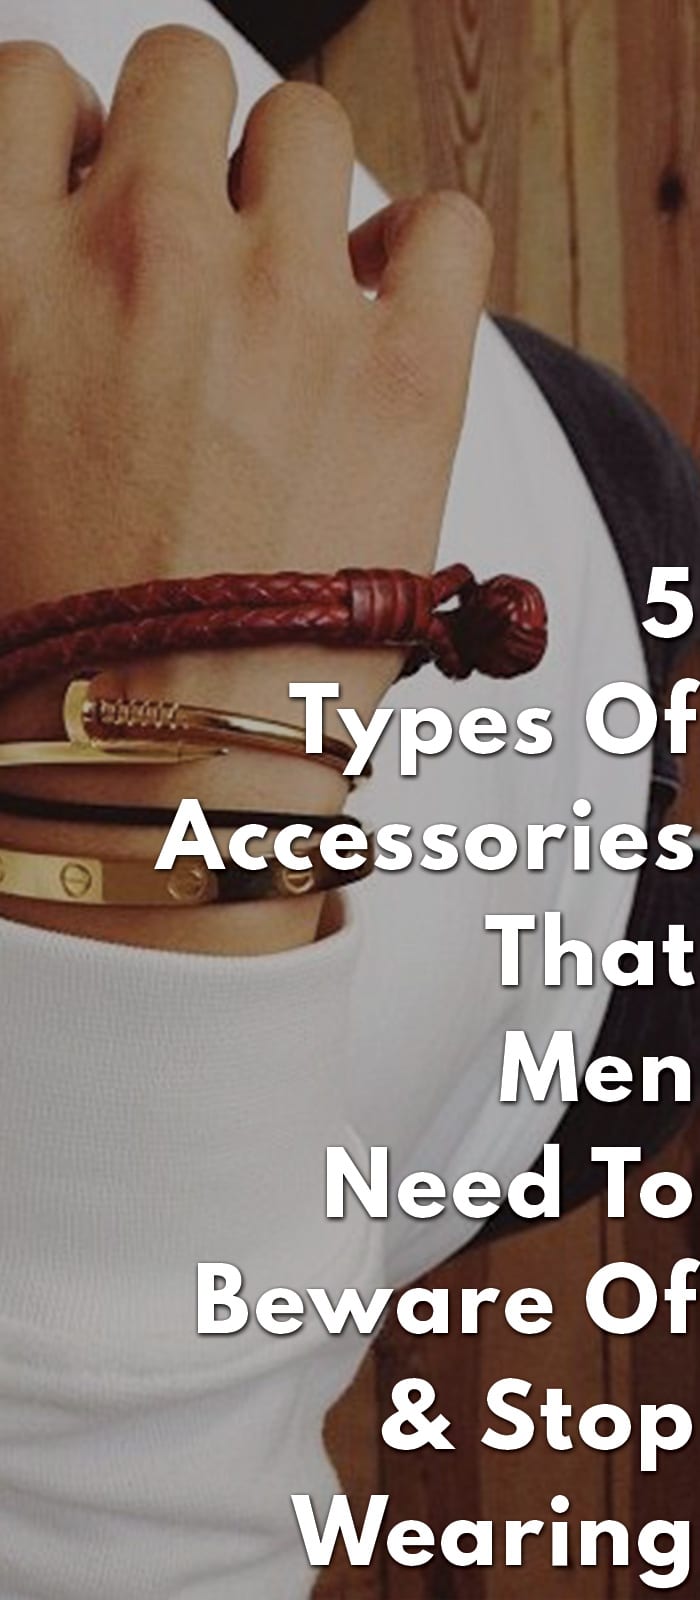 5-Types-Of-Accessories-That-Men-Need-To-Beware-Of-&-Stop-Wearing